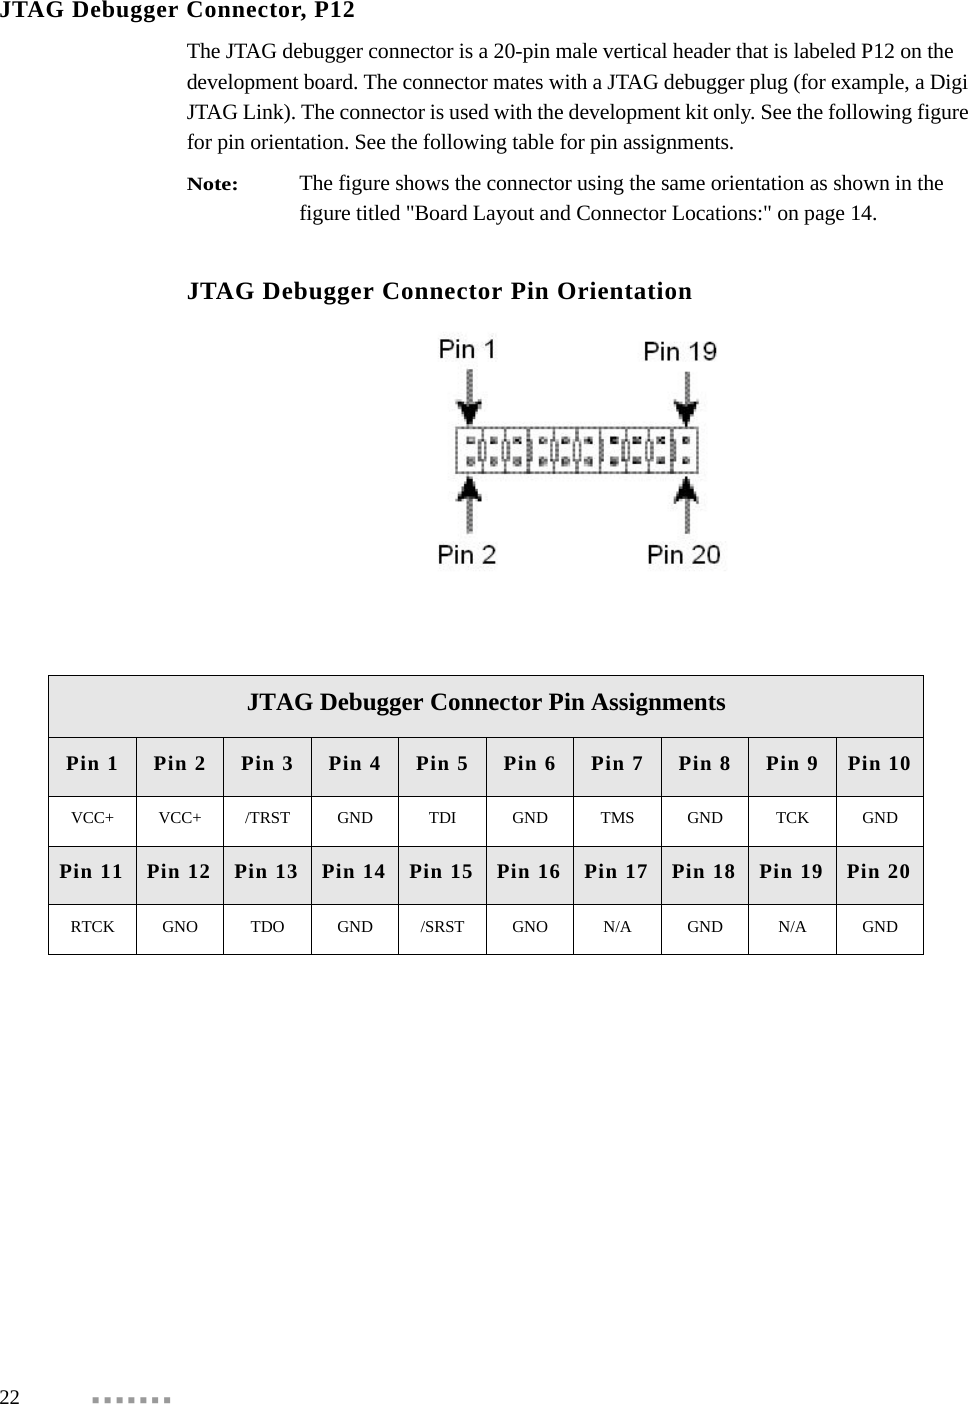 22  JTAG Debugger Connector, P12The JTAG debugger connector is a 20-pin male vertical header that is labeled P12 on the development board. The connector mates with a JTAG debugger plug (for example, a Digi JTAG Link). The connector is used with the development kit only. See the following figure for pin orientation. See the following table for pin assignments.Note:The figure shows the connector using the same orientation as shown in the figure titled &quot;Board Layout and Connector Locations:&quot; on page 14.JTAG Debugger Connector Pin OrientationJTAG Debugger Connector Pin AssignmentsPin 1 Pin 2 Pin 3 Pin 4 Pin 5 Pin 6 Pin 7 Pin 8 Pin 9 Pin 10VCC+ VCC+ /TRST GND TDI GND TMS GND TCK GNDPin 11 Pin 12 Pin 13 Pin 14 Pin 15 Pin 16 Pin 17 Pin 18 Pin 19 Pin 20RTCK GNO TDO GND /SRST GNO N/A GND N/A GND